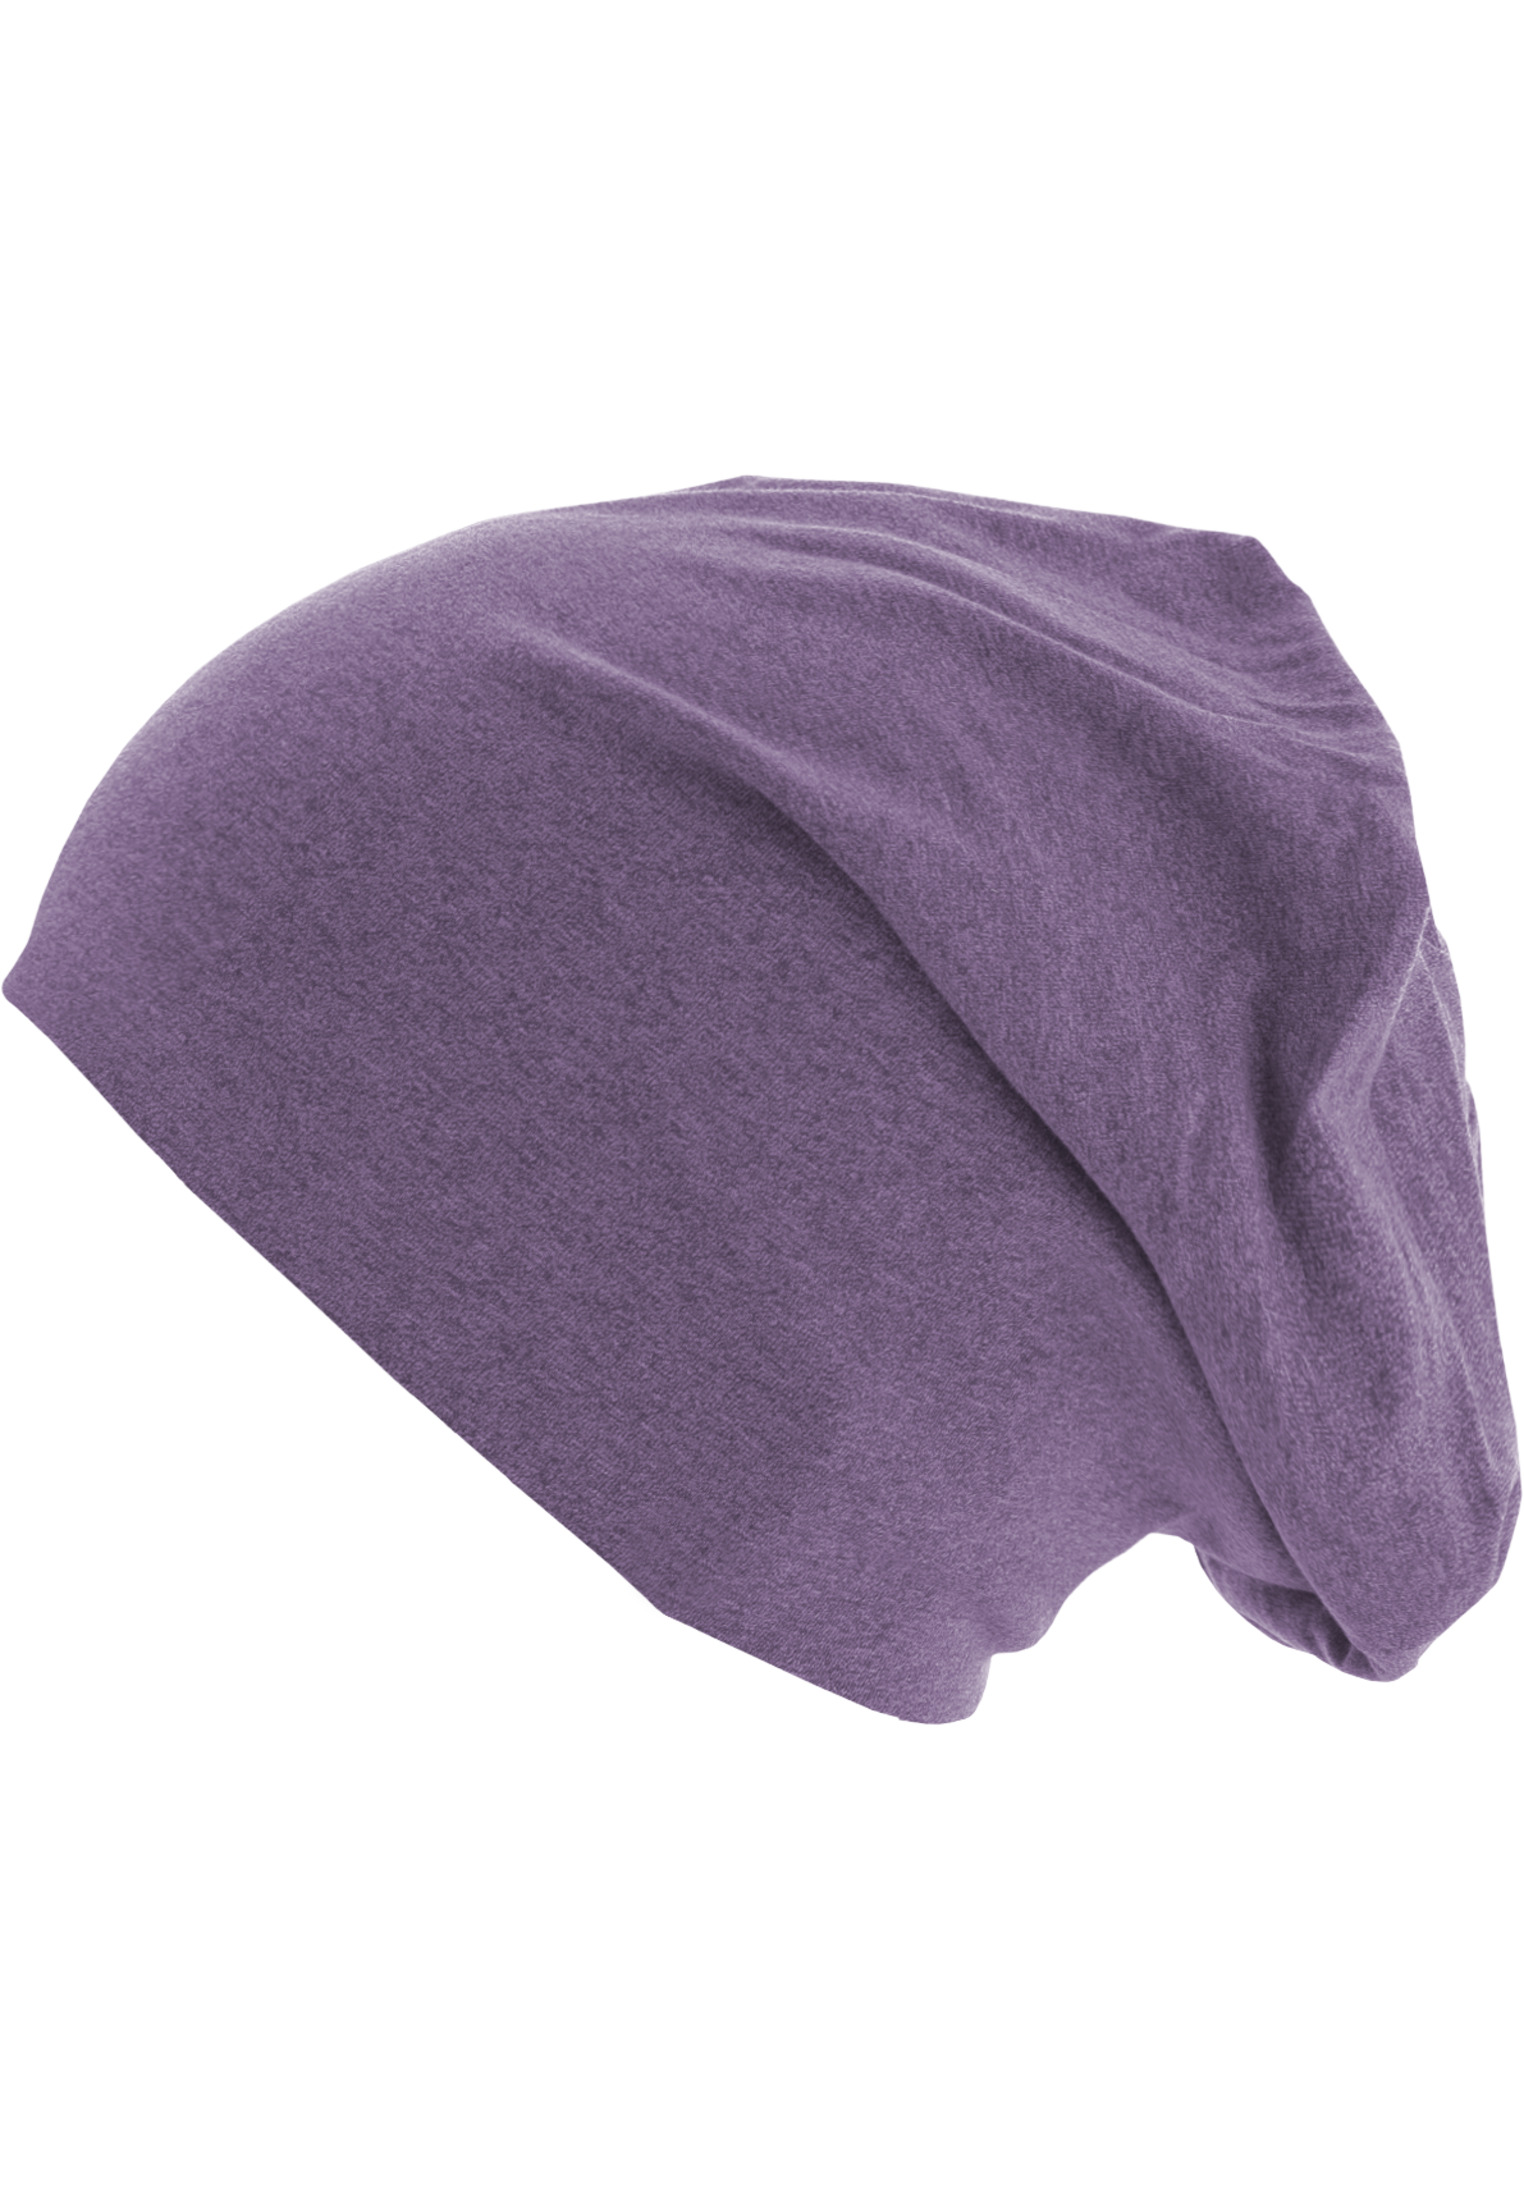 Caps & Beanies Heather Jersey Beanie in Farbe purple